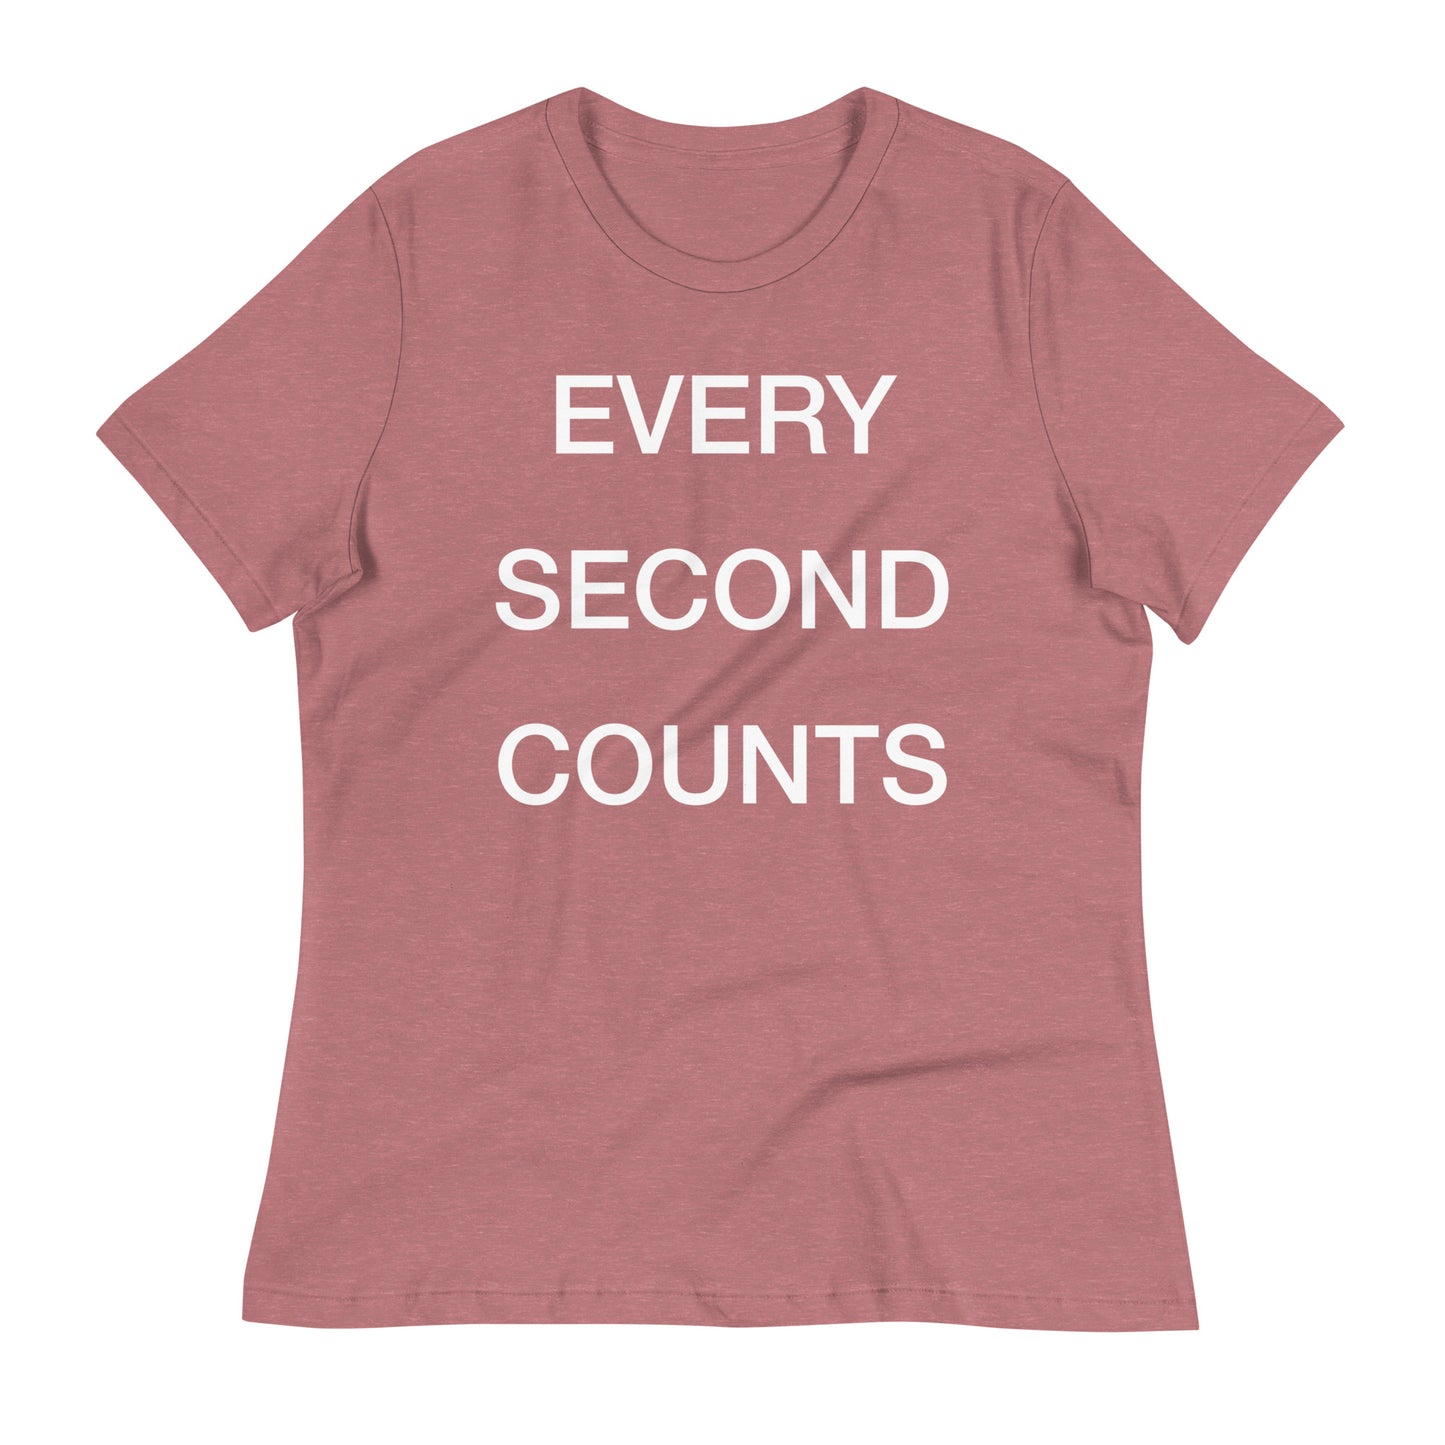 Every Second Counts Women's Signature Tee